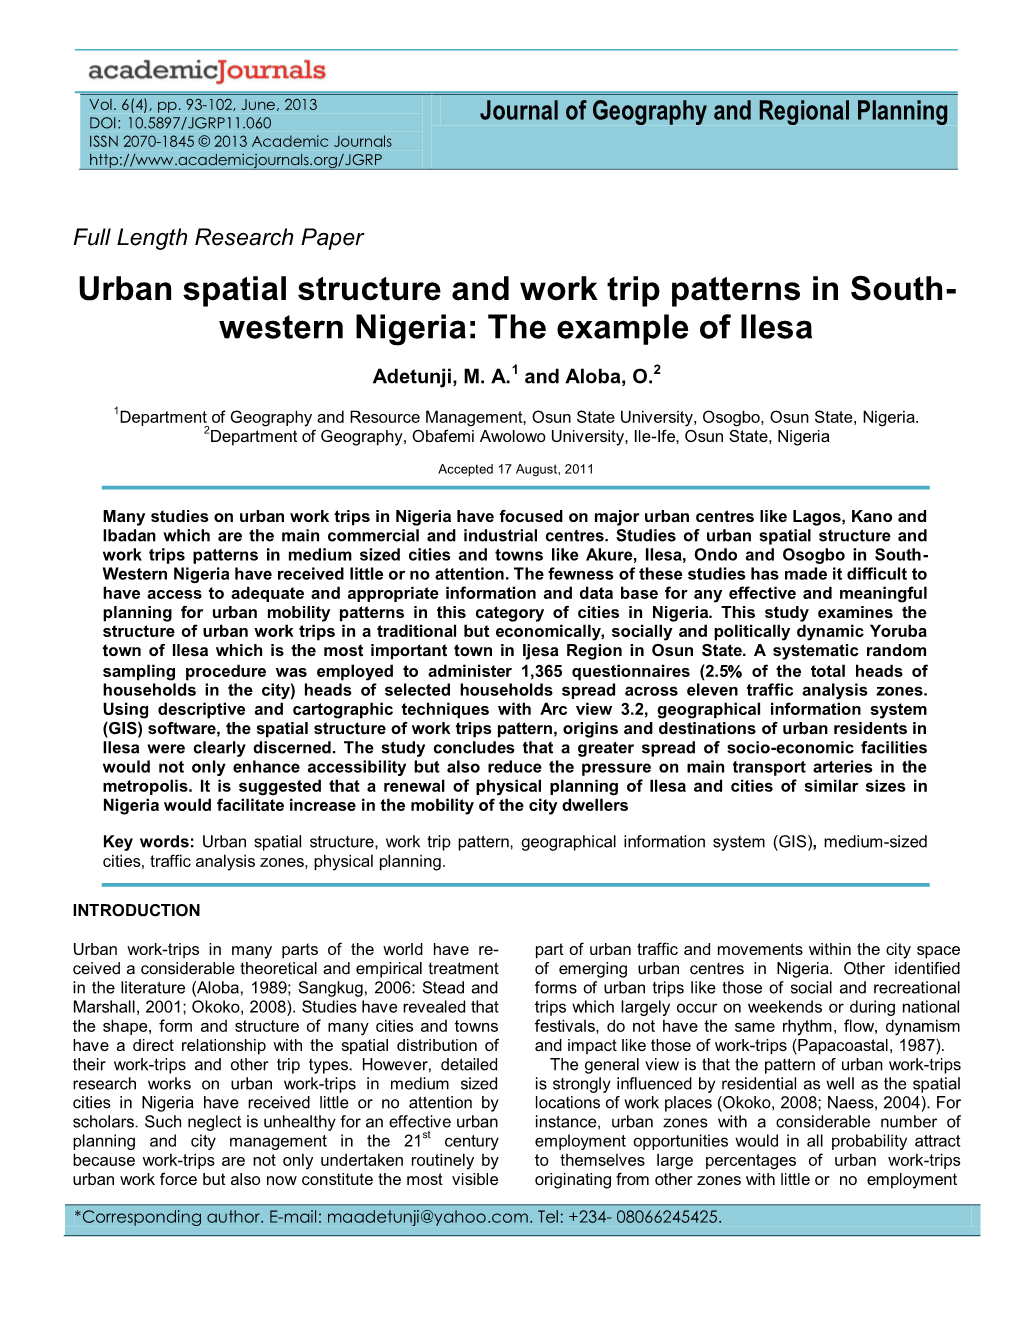 Urban Spatial Structure and Work Trip Patterns in South- Western Nigeria: the Example of Ilesa